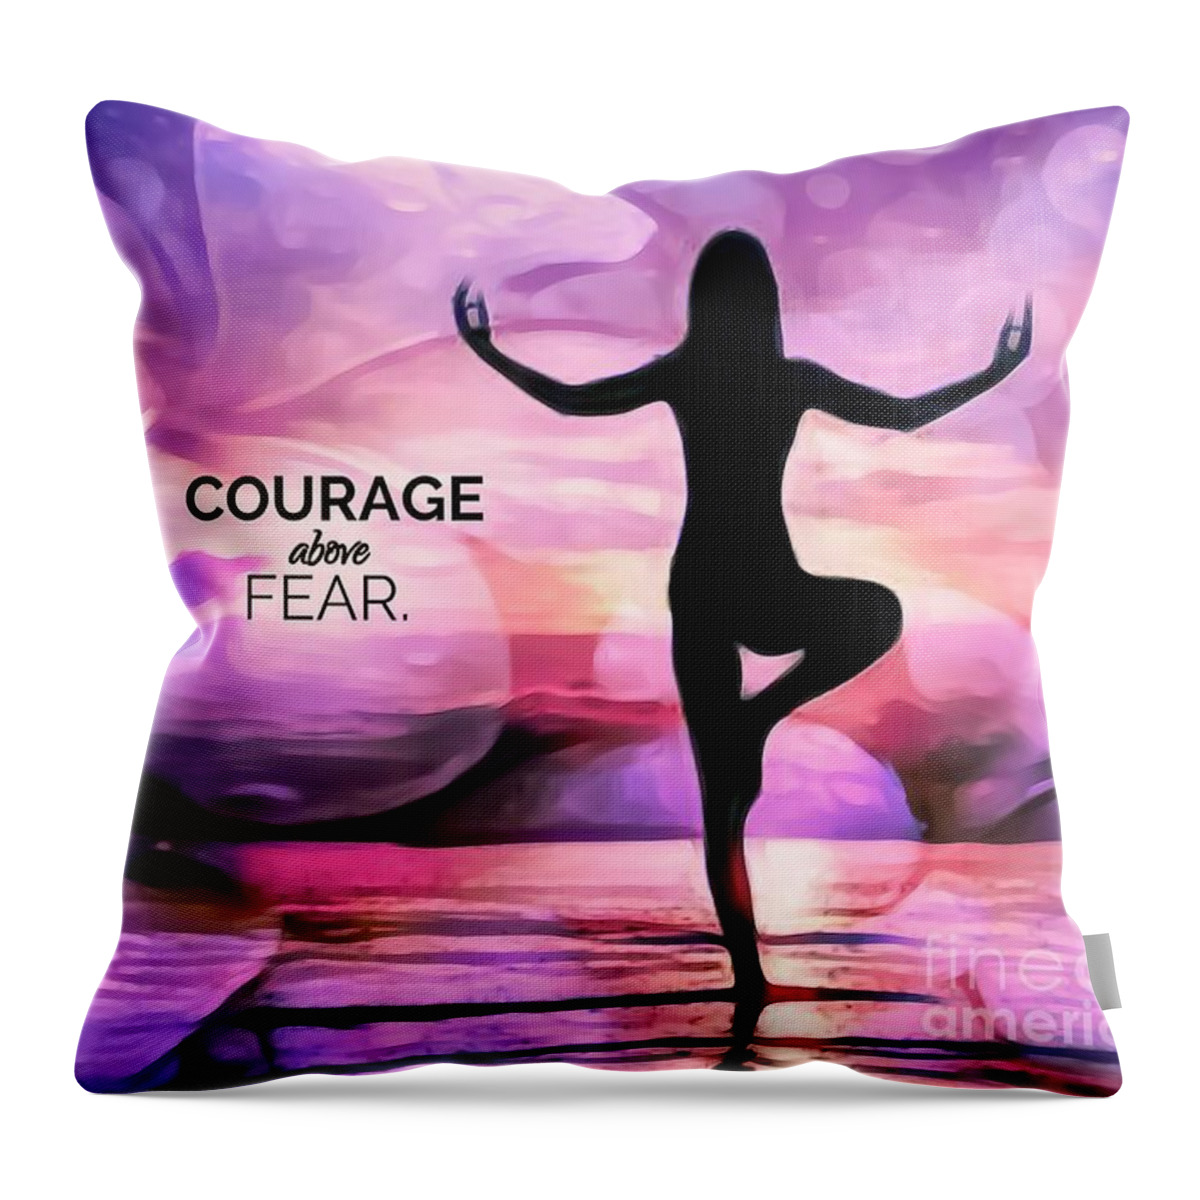 Courage Above Fear Throw Pillow featuring the mixed media Courage Above Fear by Laurie's Intuitive